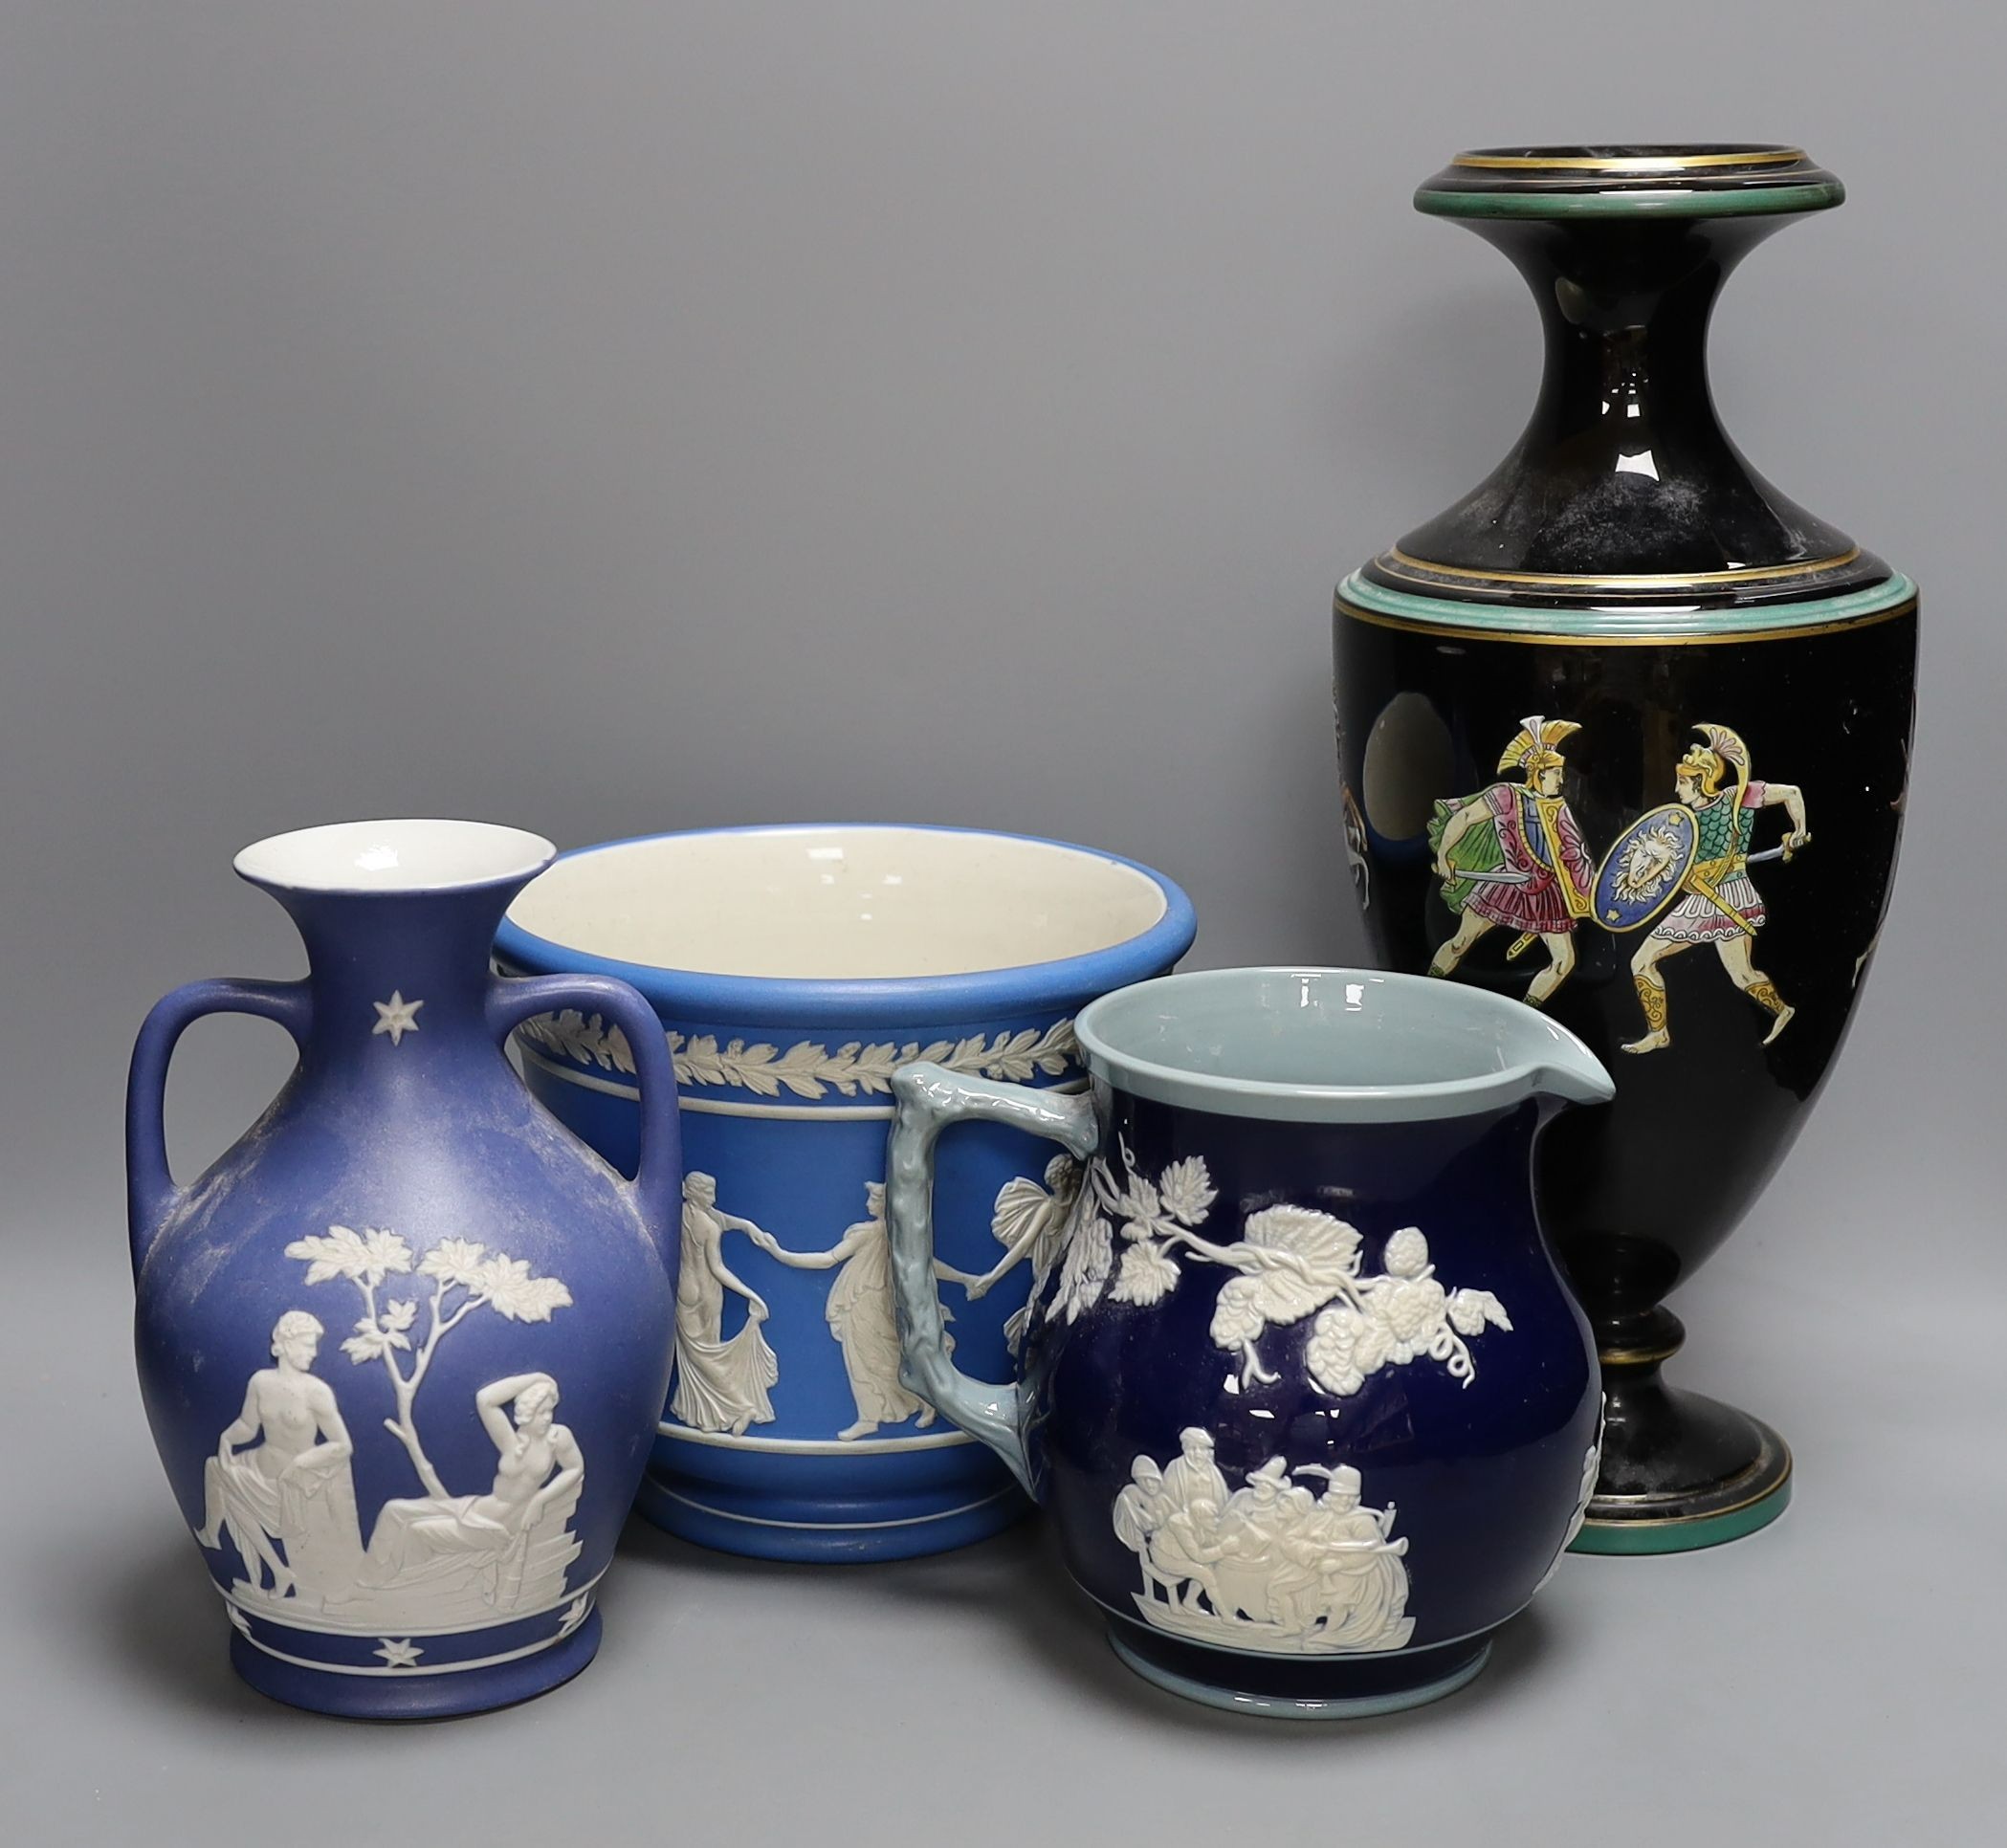 A jasper ware Portland style vase, together with a Jasperware jardiniere and vase, and a Spode jug - tallest 37.5cm (4)